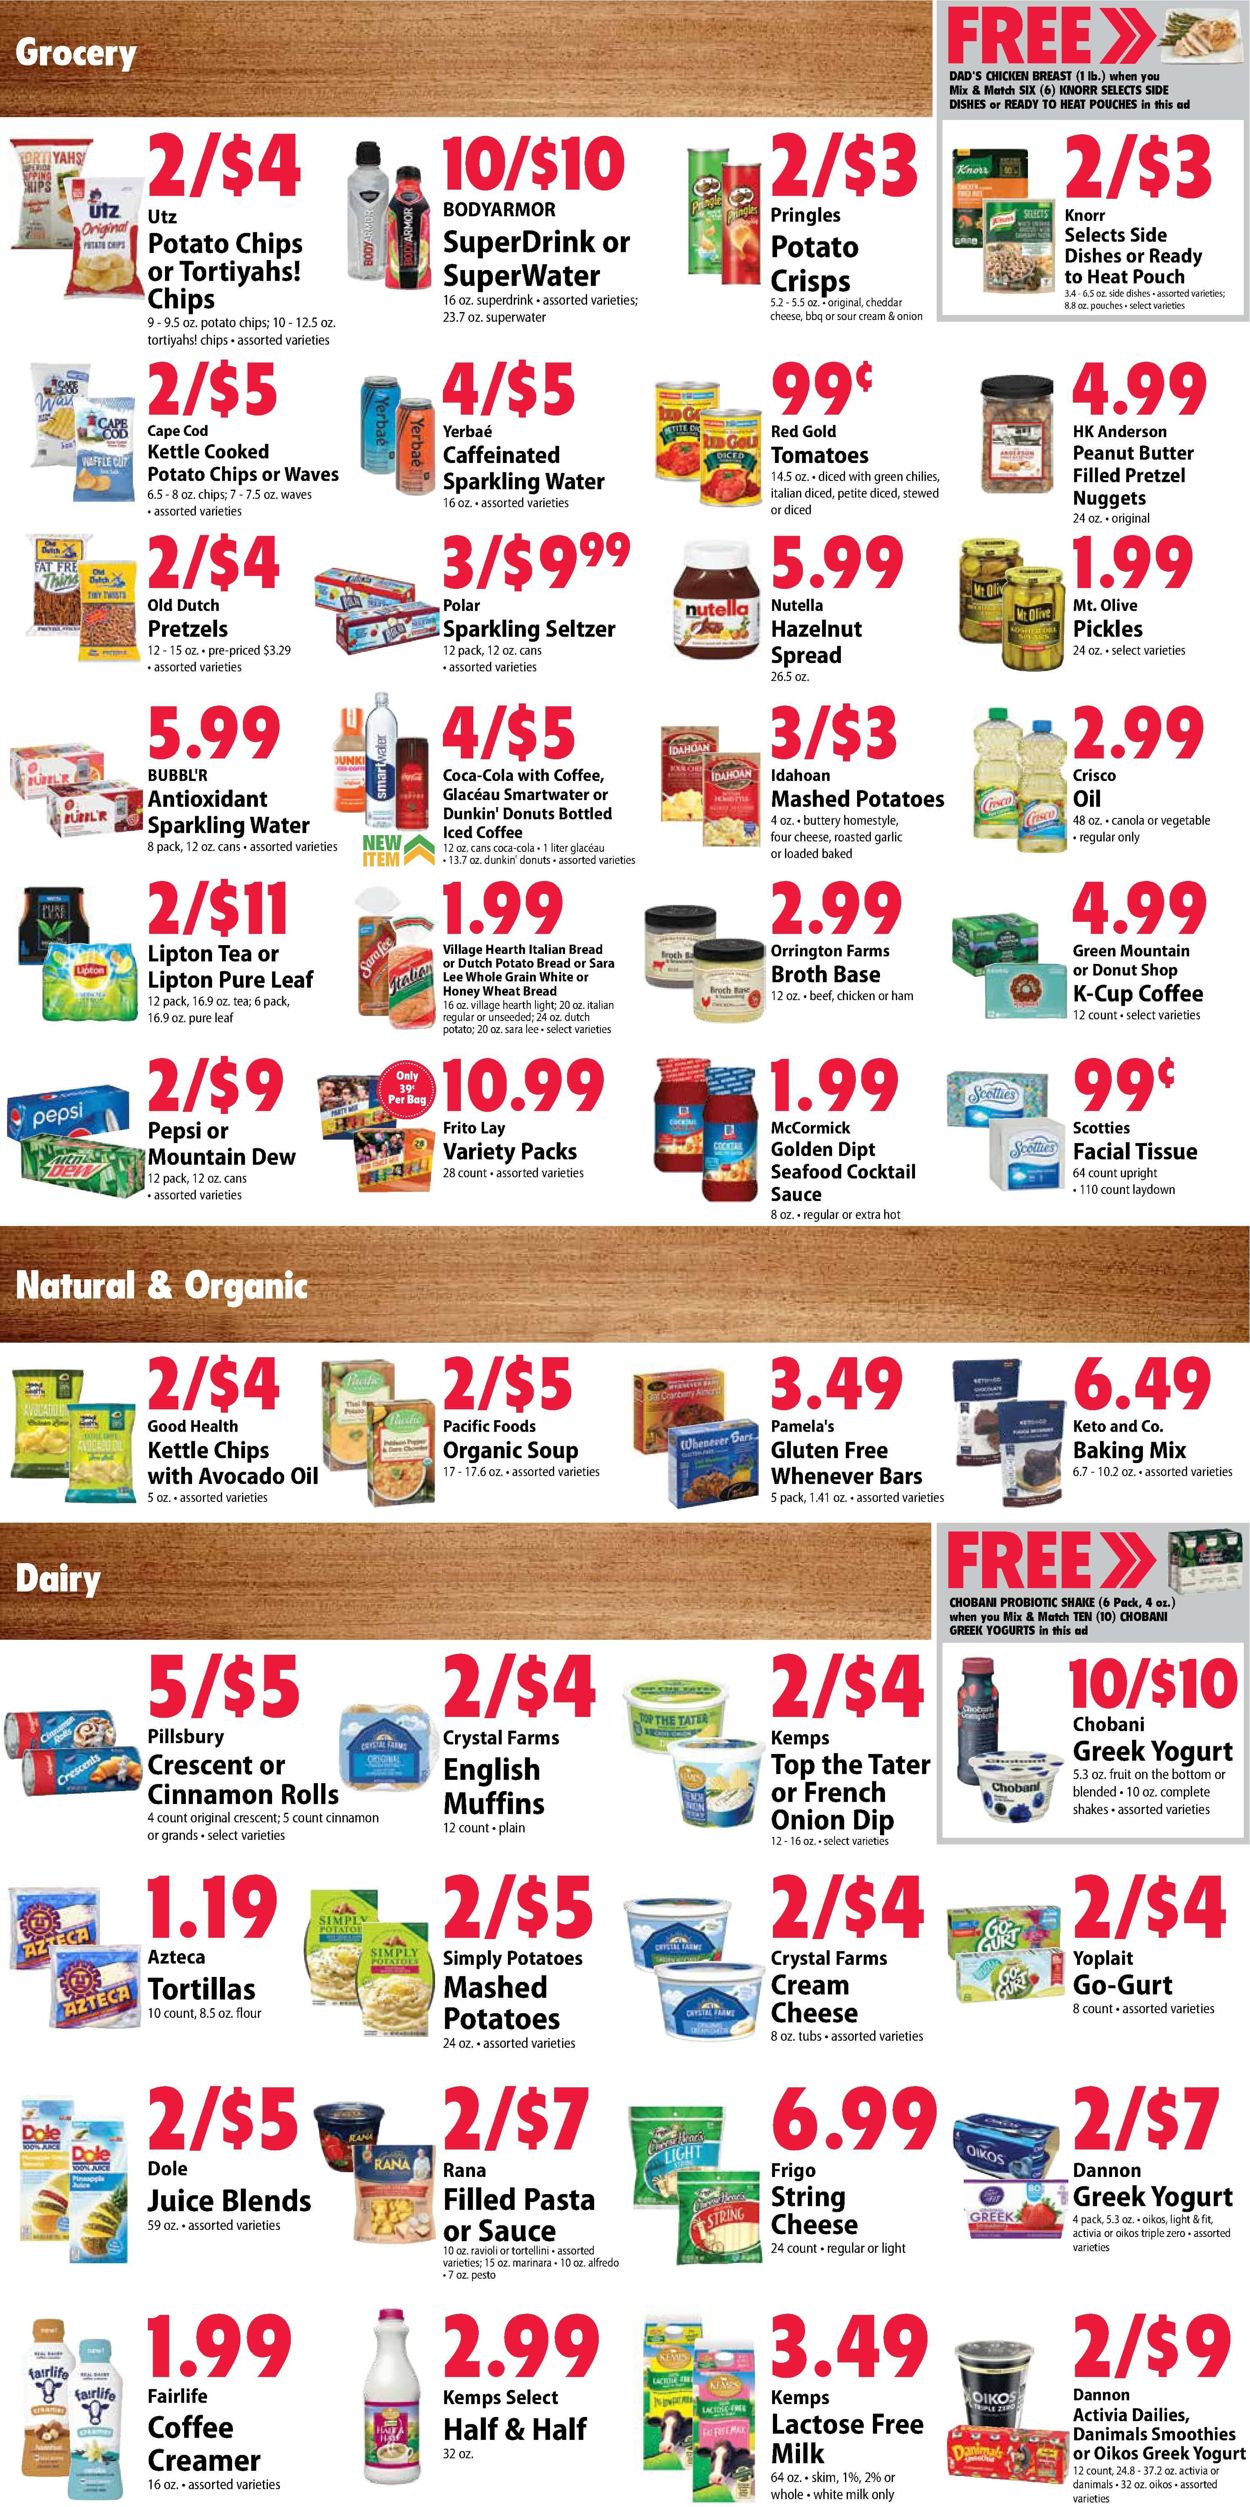 Festival Foods Current weekly ad 03/03 - 03/09/2021 [3] - frequent-ads.com